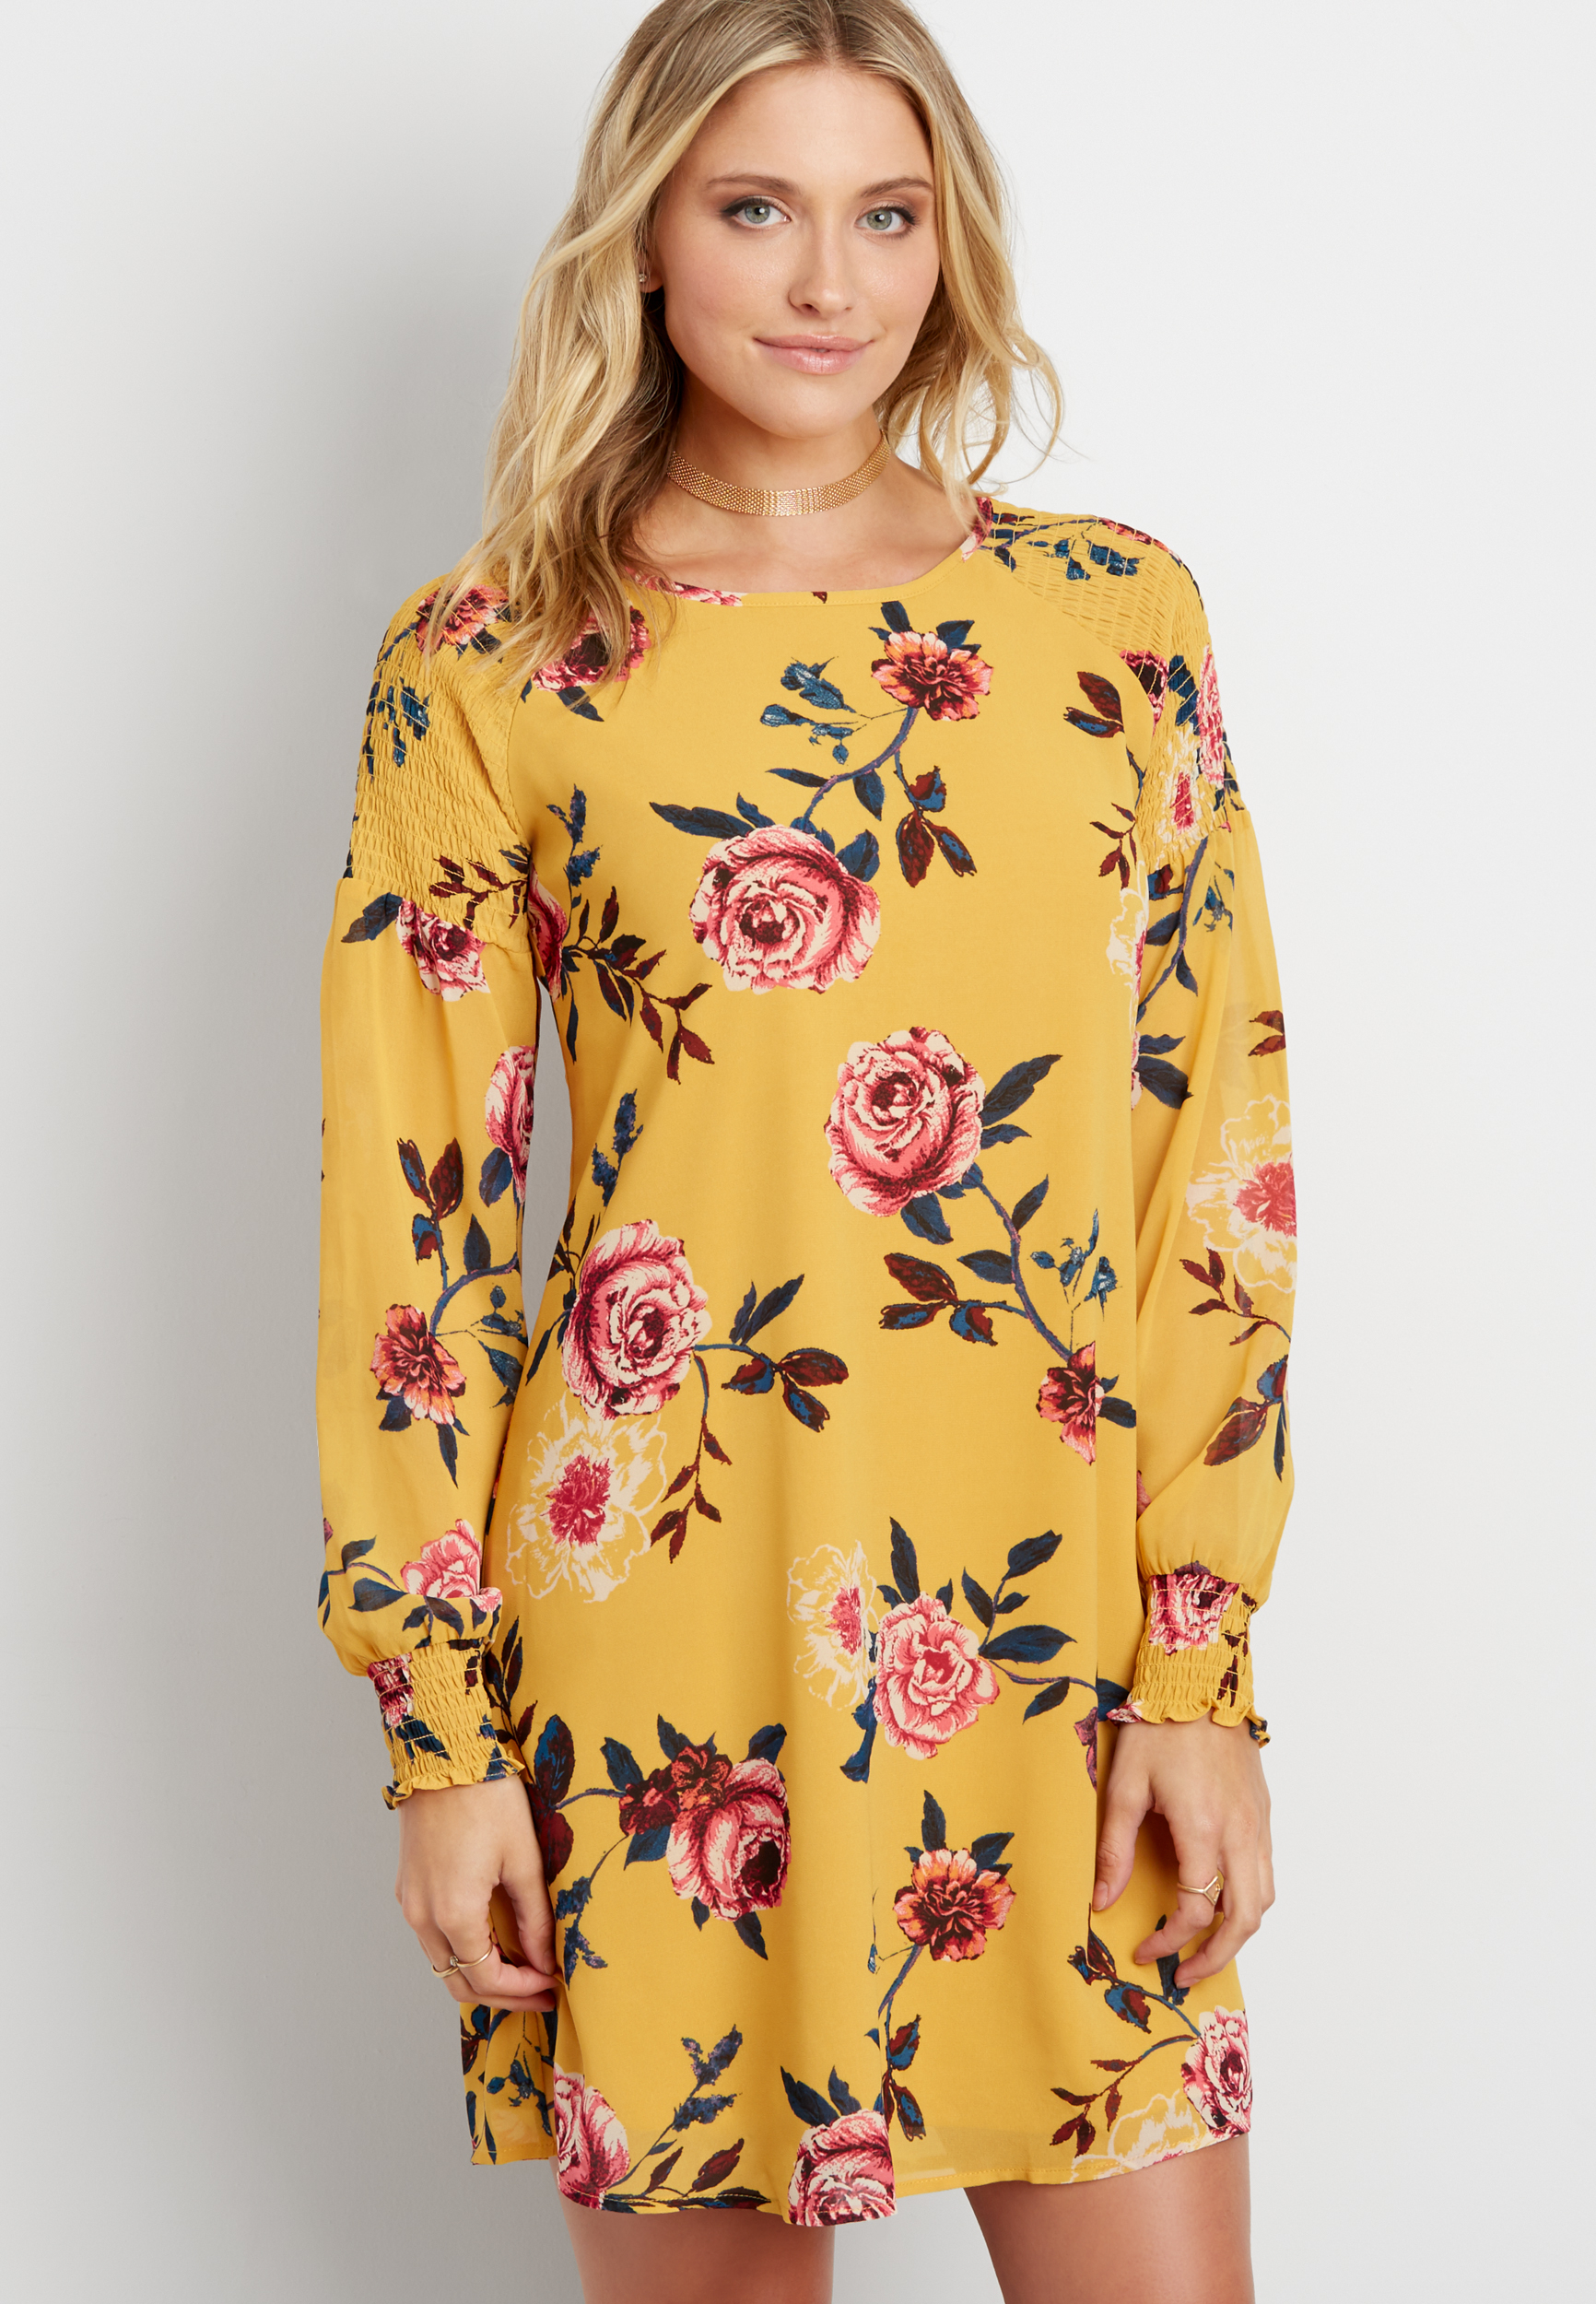 floral print chiffon shift dress with smocking | maurices